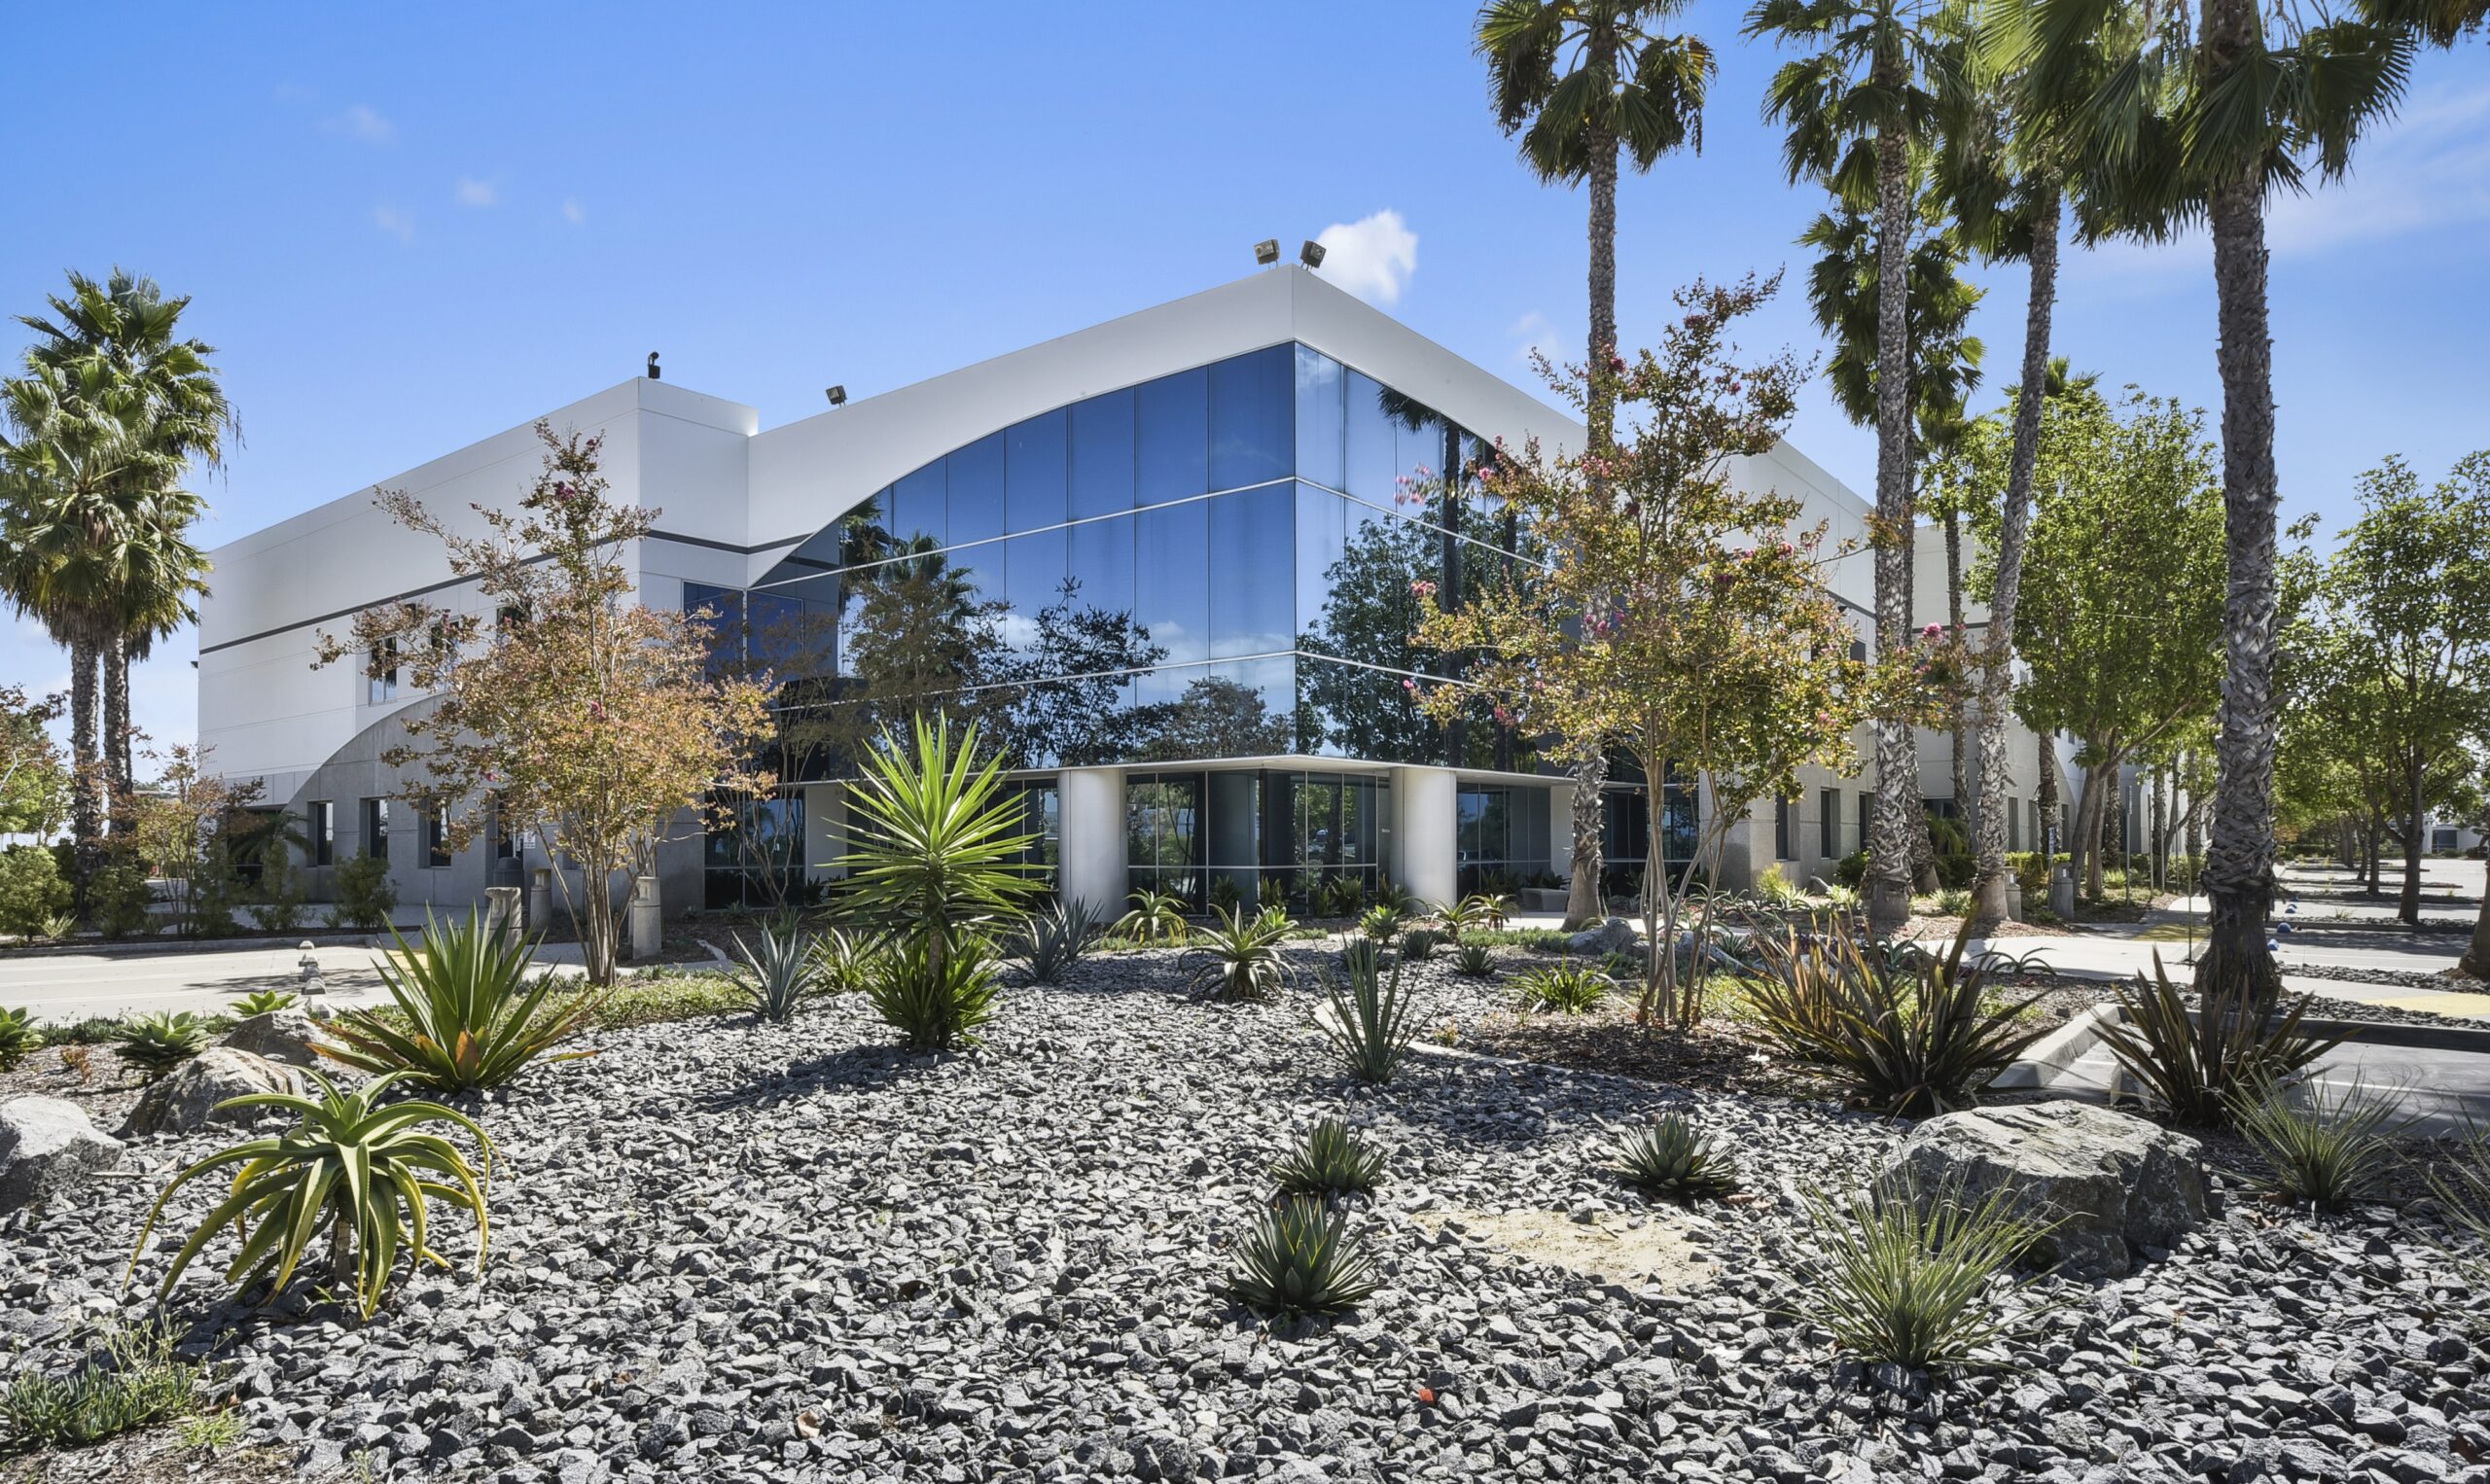 kkr-acquires-vista-california-industrial-property-from-westcore